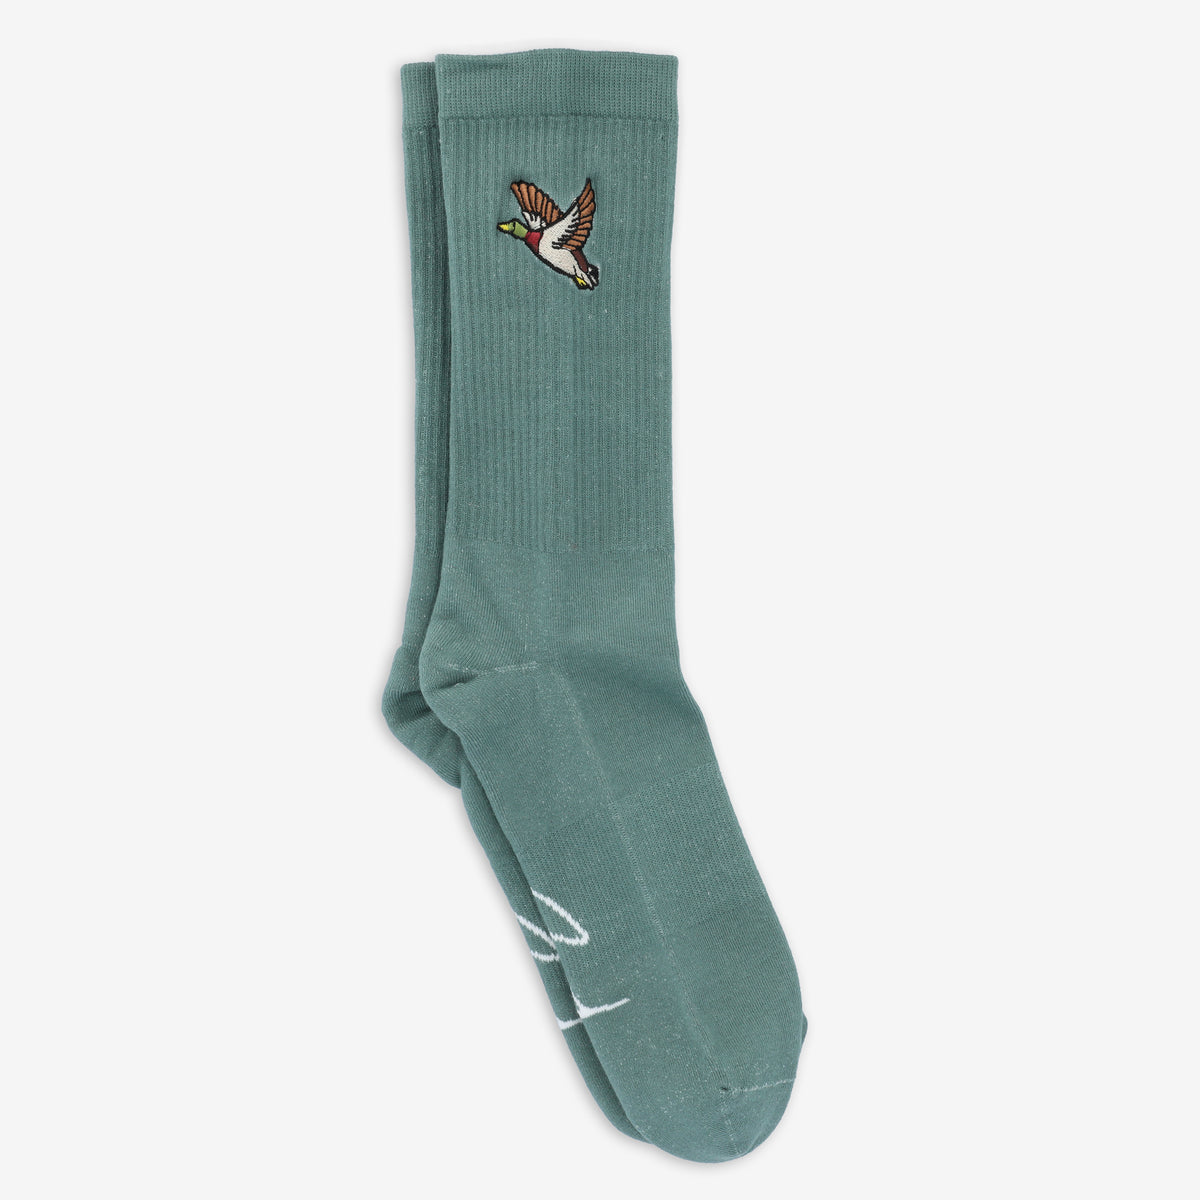 The Crew Sock in Green Duck Squad